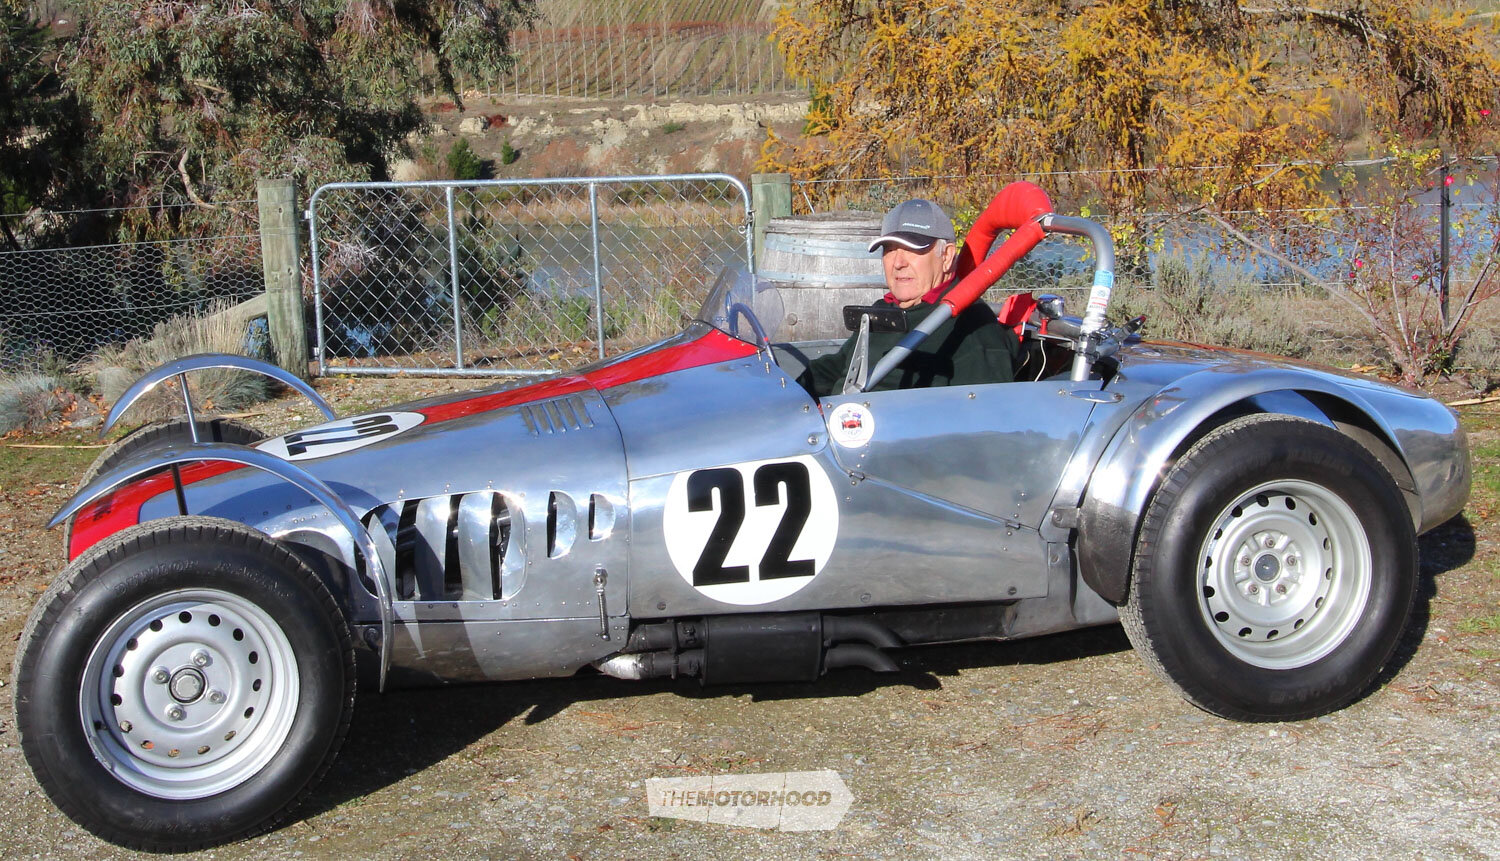 Ralph still gets a kick out of driving his Lycoming Special, advanced for its day